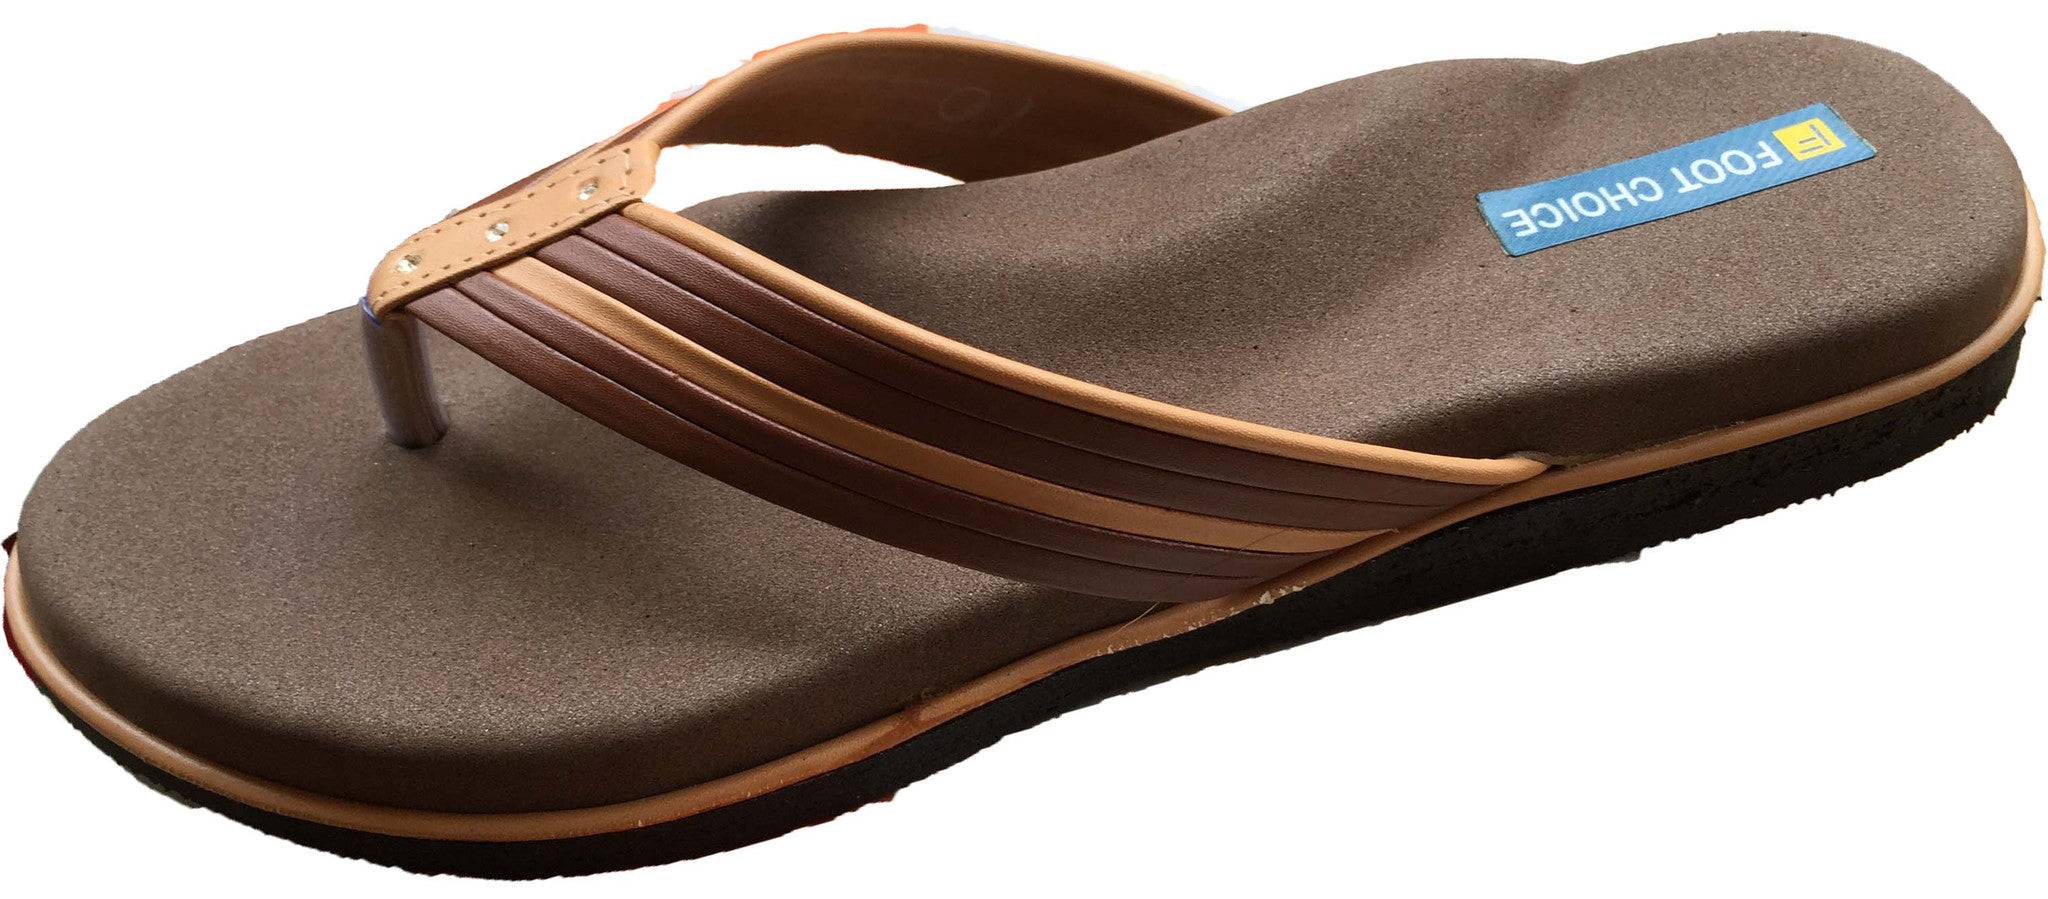 ortho arch support slippers